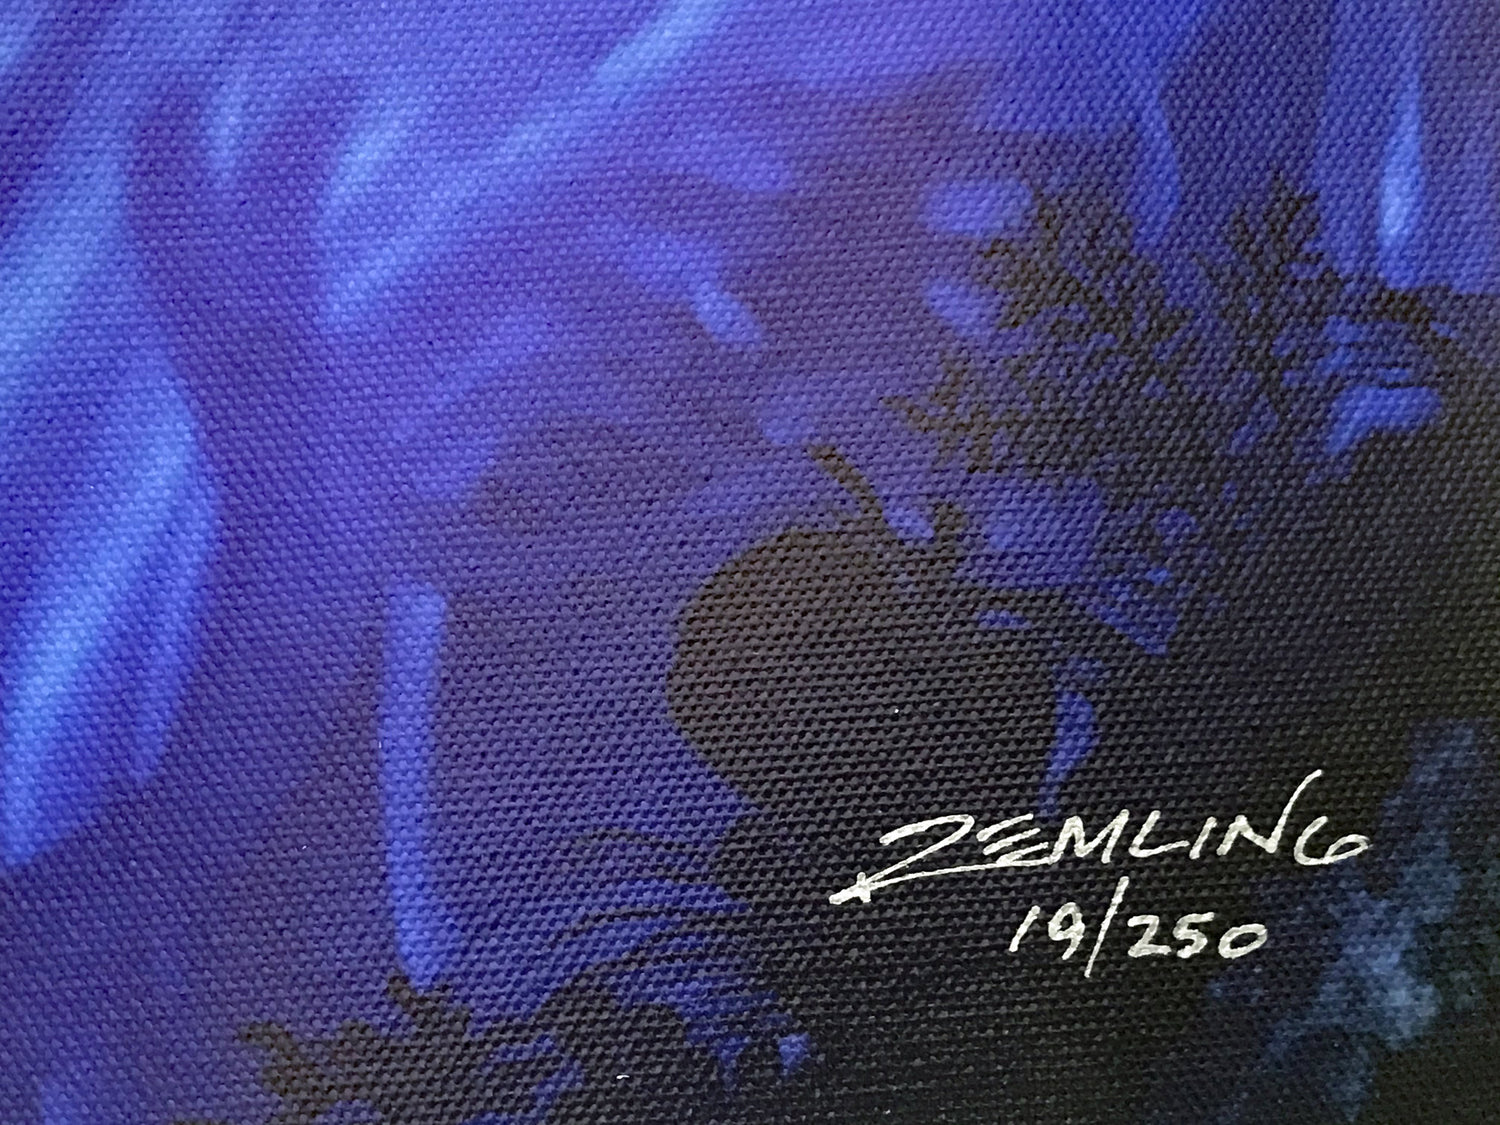 A New Beginning Mark Remling Canvas Giclée Print Artist Hand Signed and Numbered